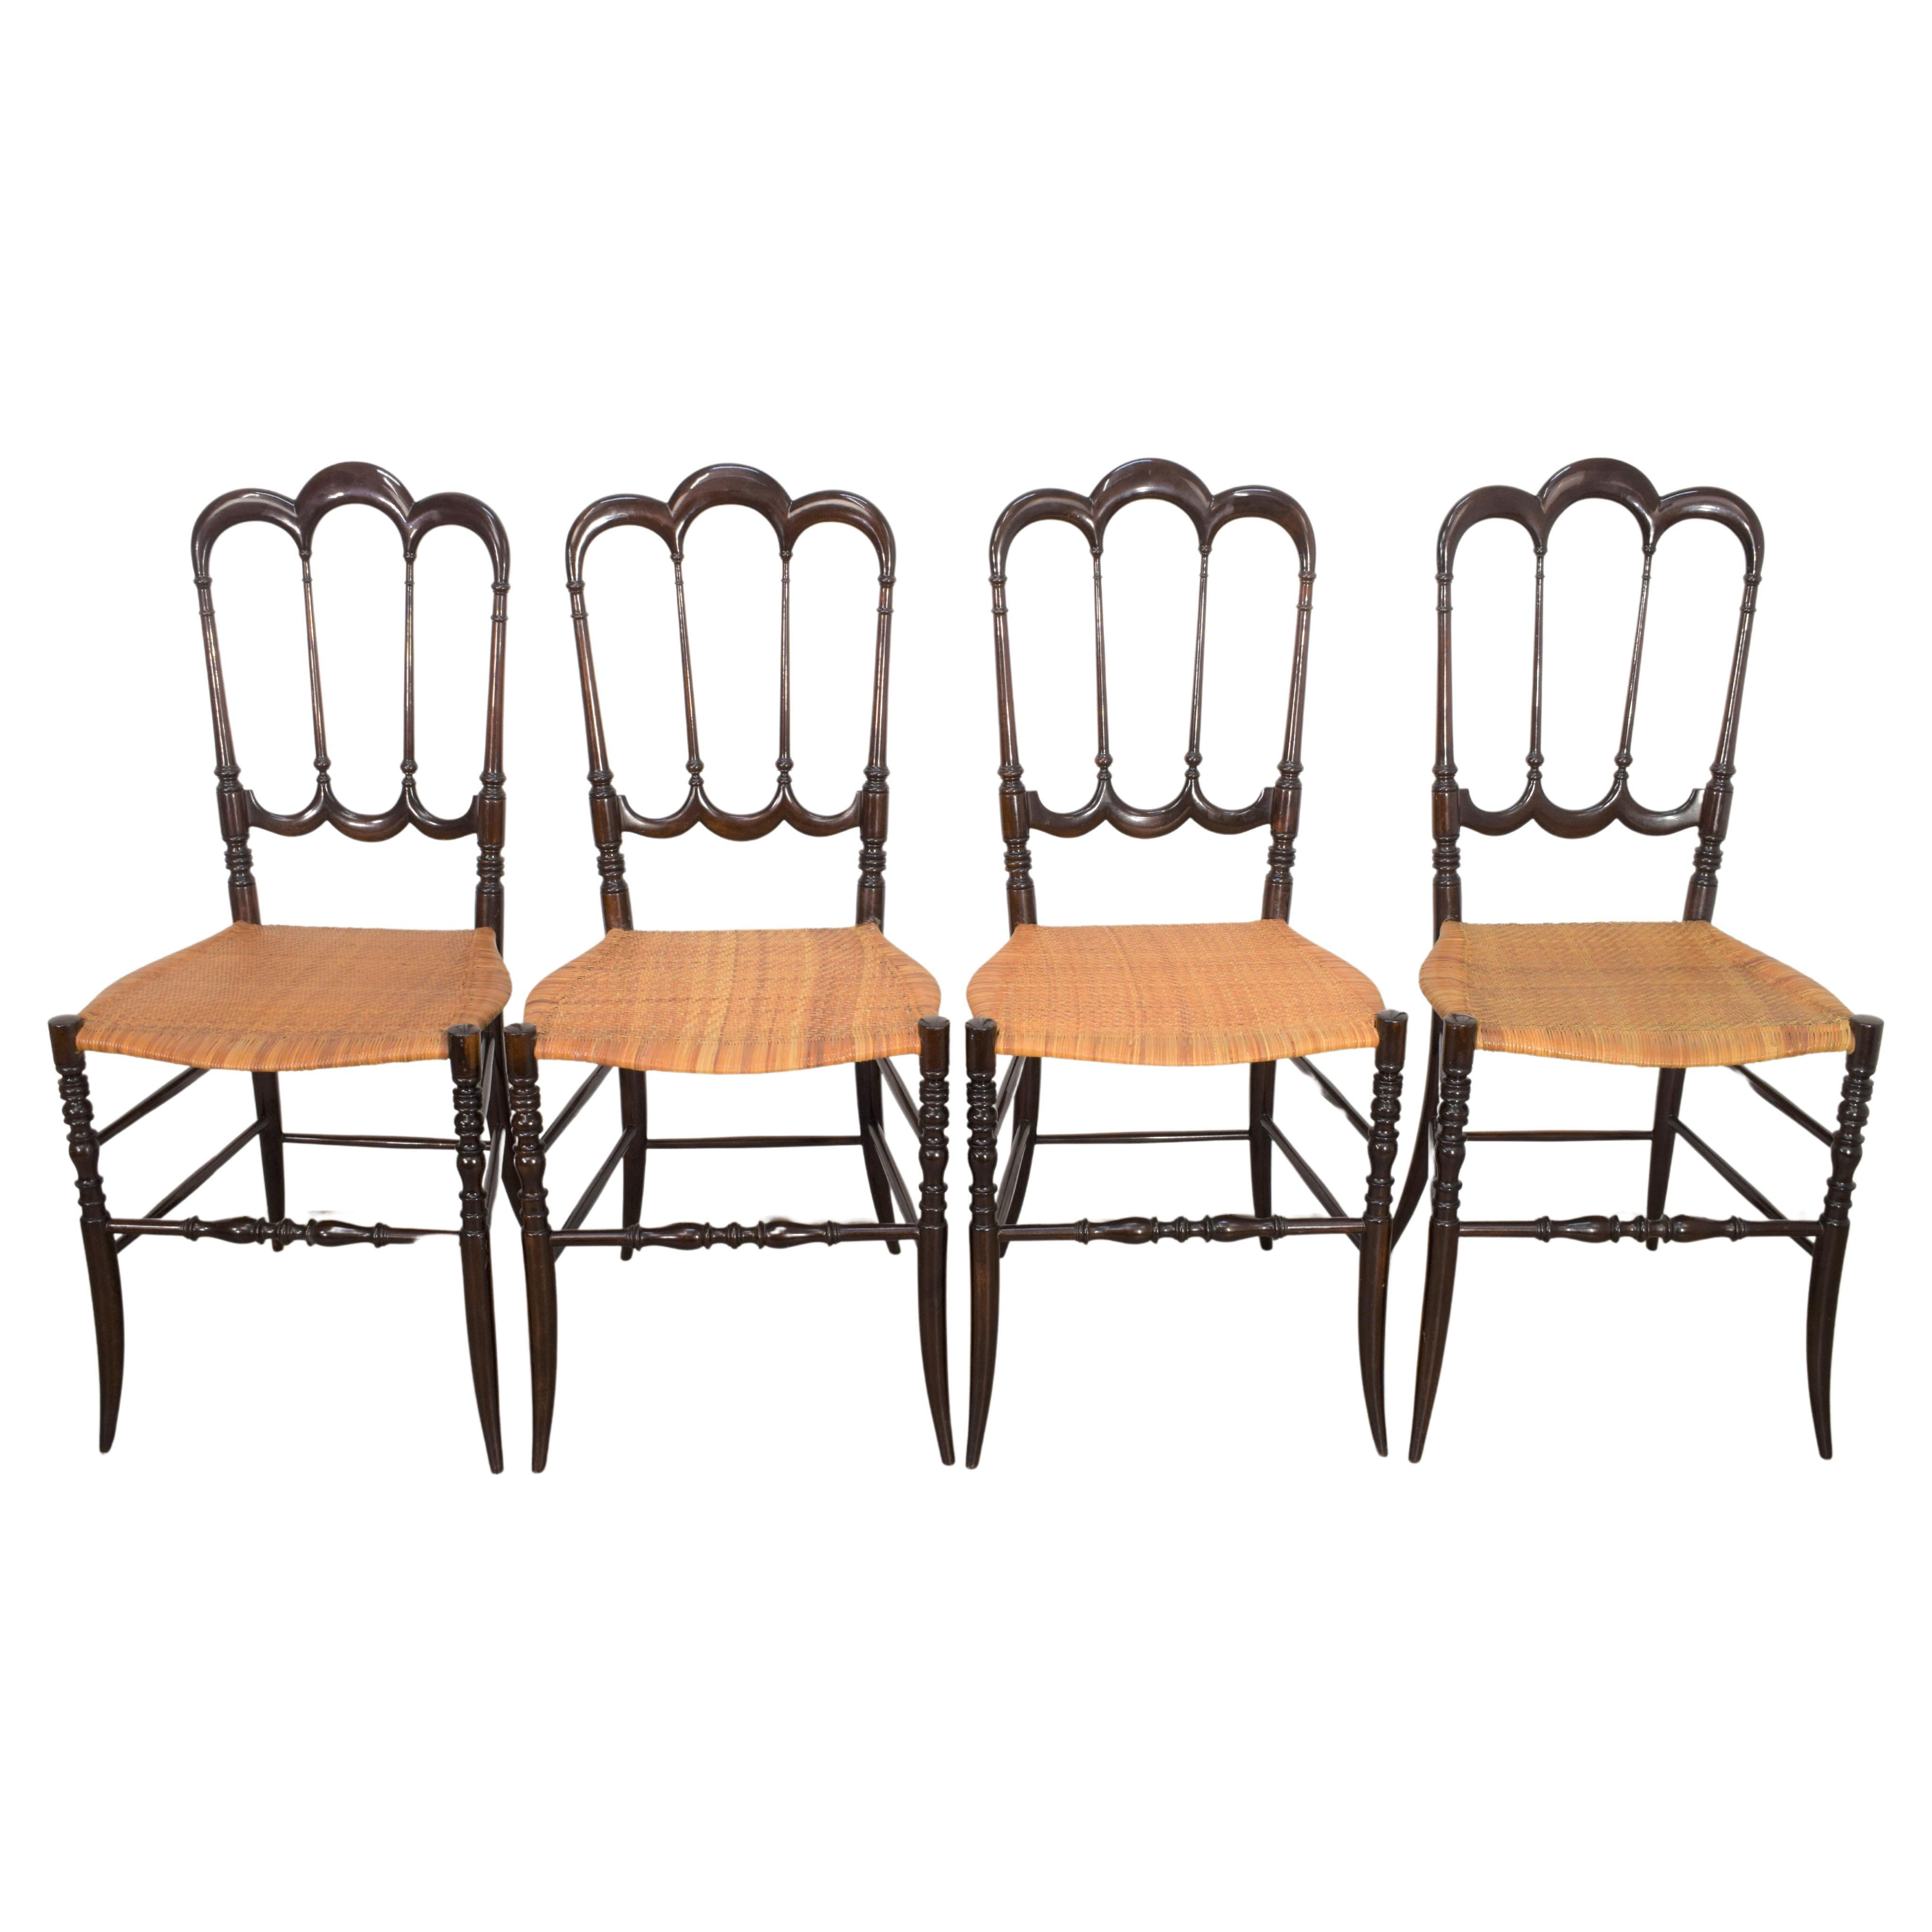 Set of 4 chairs model "tre archi" by Levaggi, Italy, 1950s For Sale